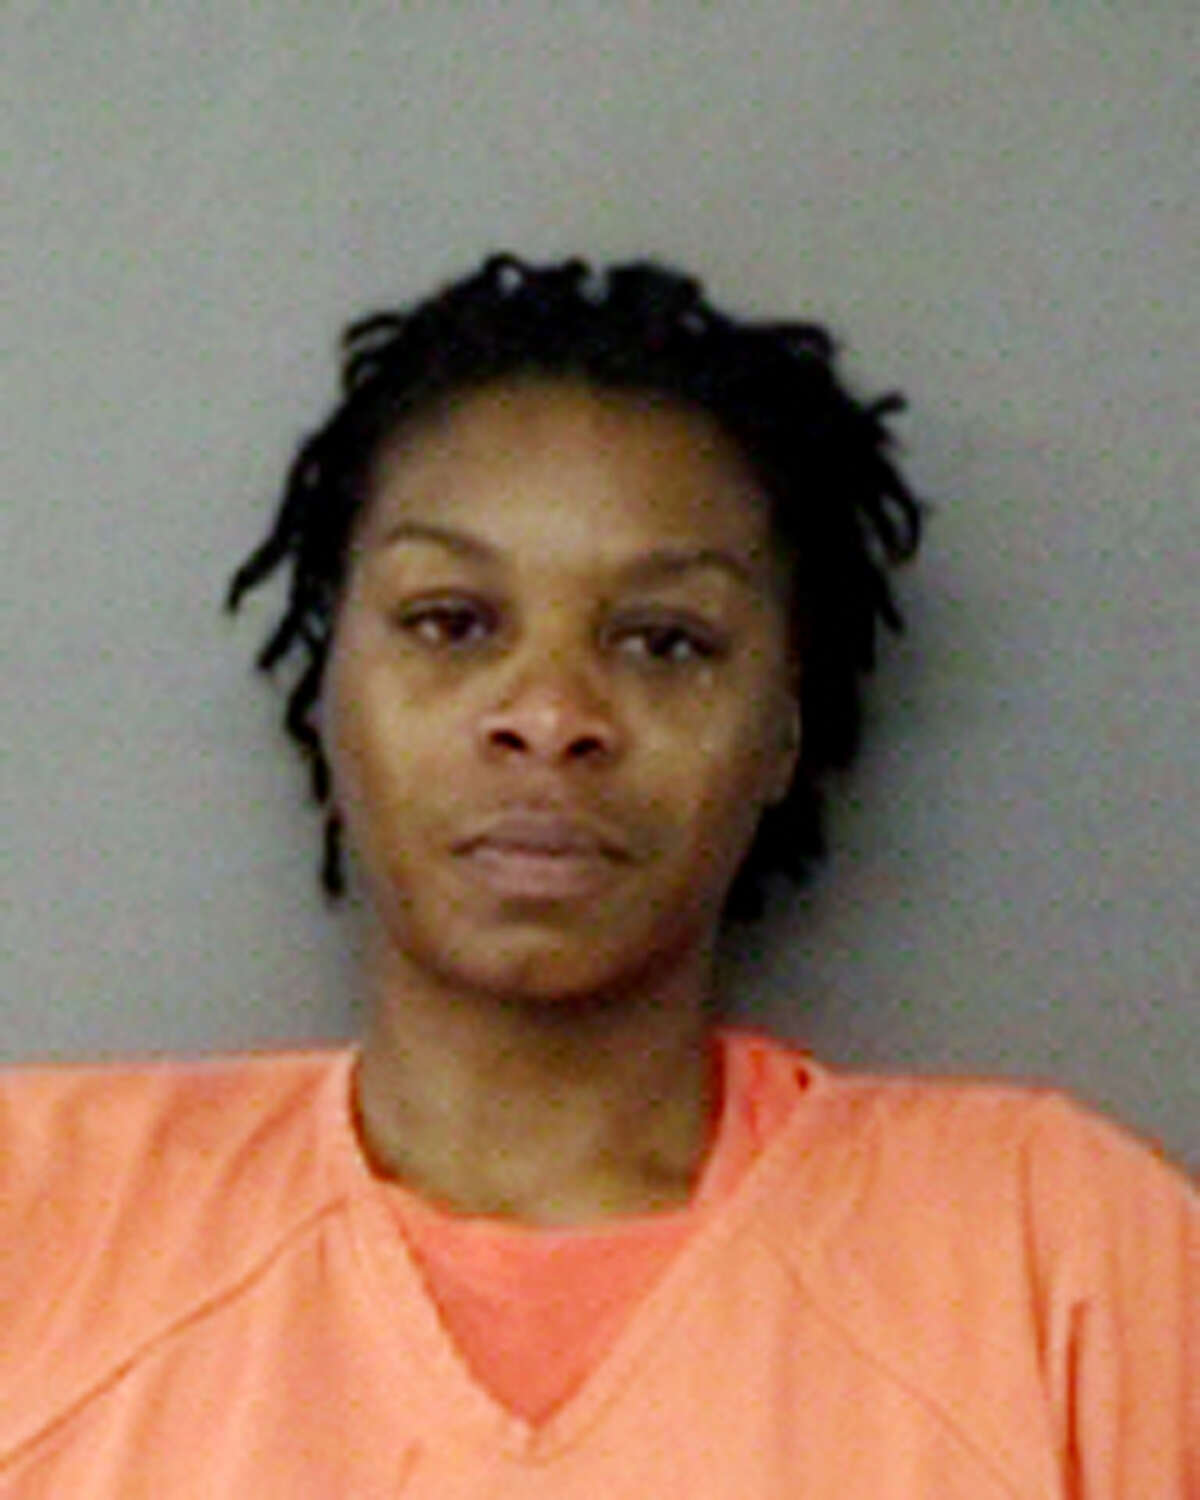 This undated file handout photo provided by the Waller County Sheriff's Office shows Sandra Bland. Less than two months after Bland was found dead in a Texas jail cell, two of her jailers quietly moved to other jobs. Rafael Zuniga and Michael Serges left the Waller County sheriff's office for the Waller Police Department, a much smaller agency with far less responsibility, in September 2015, starting work on the same day. (Waller County Sheriff's Office via AP, File)